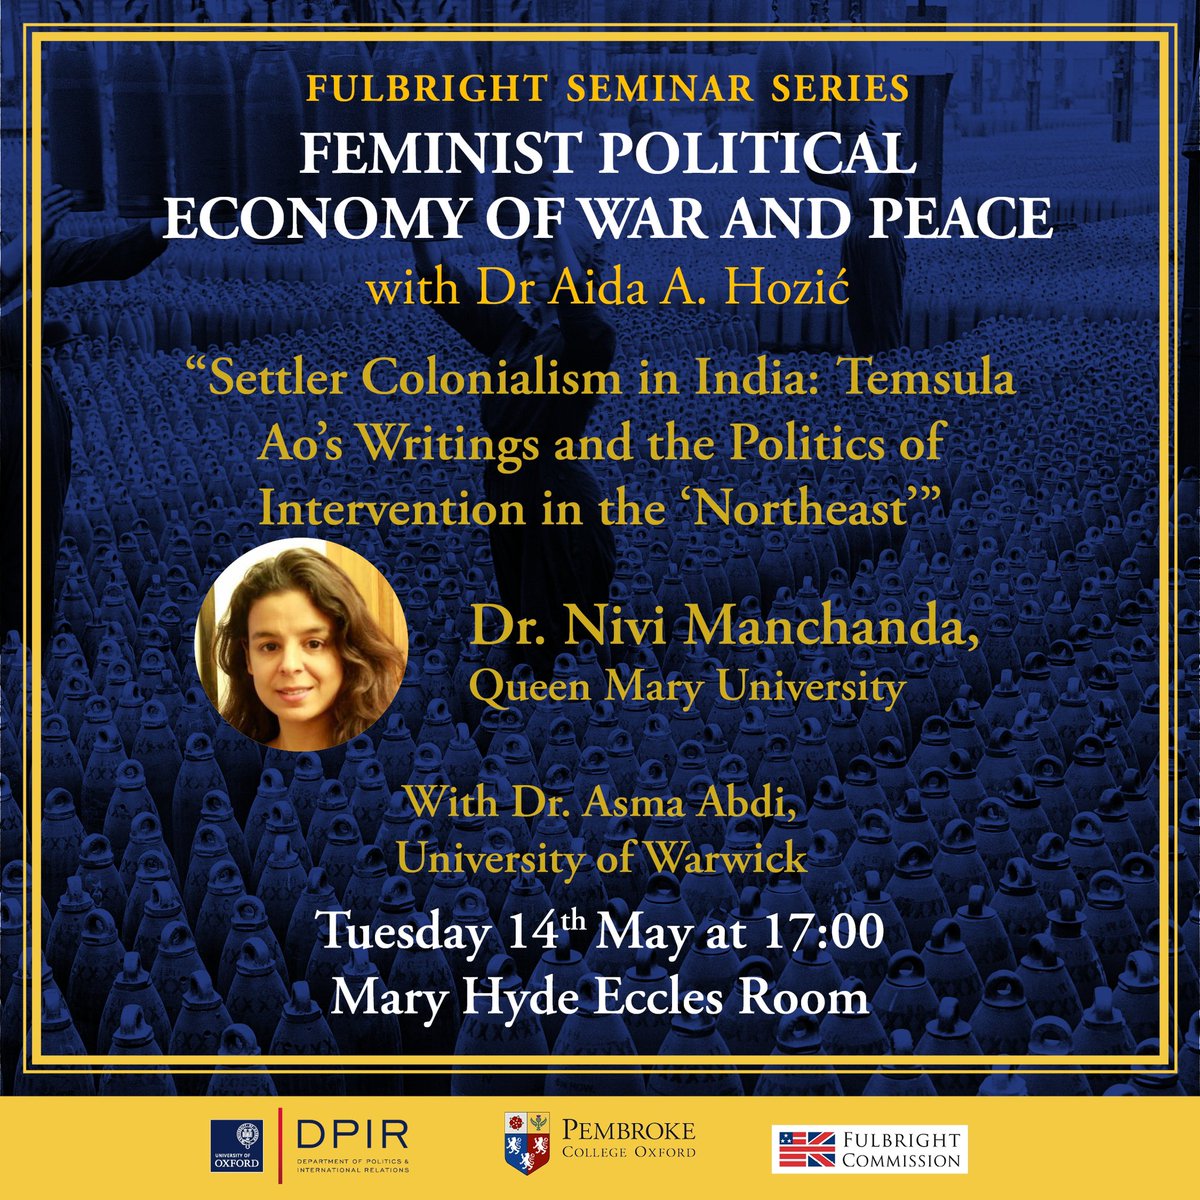 Tomorrow, Tuesday May 14, at 17:00 @PembrokeOxford, in the seminar series on Feminist Political Economy of War and Peace, Dr Nivi Manchanda will give a talk on settler colonialism in India’s NE. Discussant is @Asma_Abdi_ . Cosponsored with @Politics_Oxford and @USUKFulbright 1/2